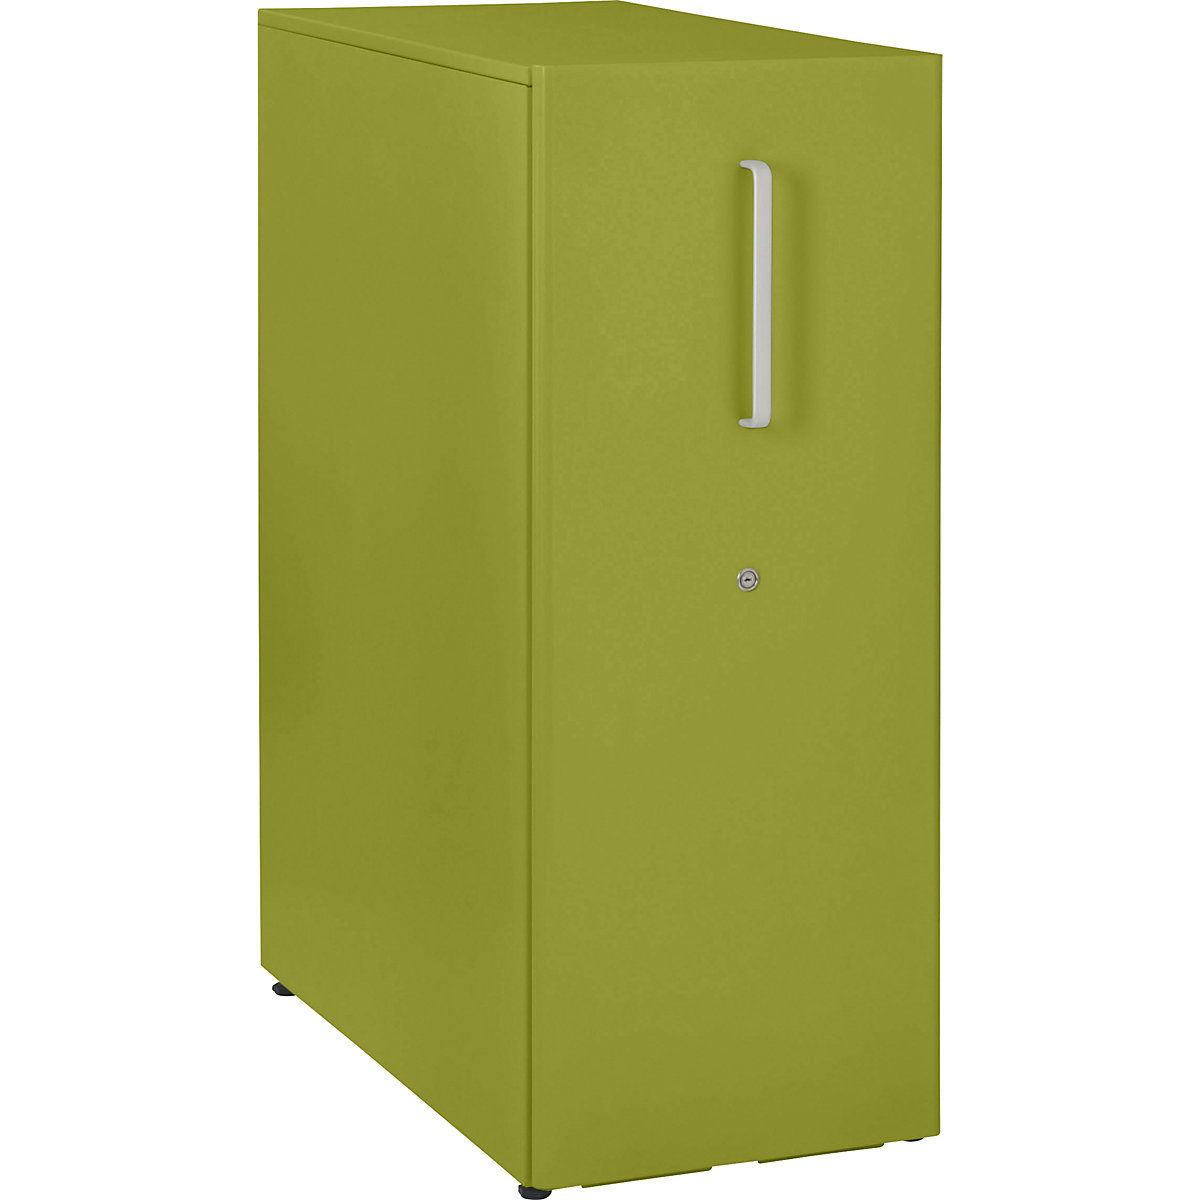 Tower™ 3 add-on furniture, with worktop – BISLEY, for the left side, 3 shelves, green-3